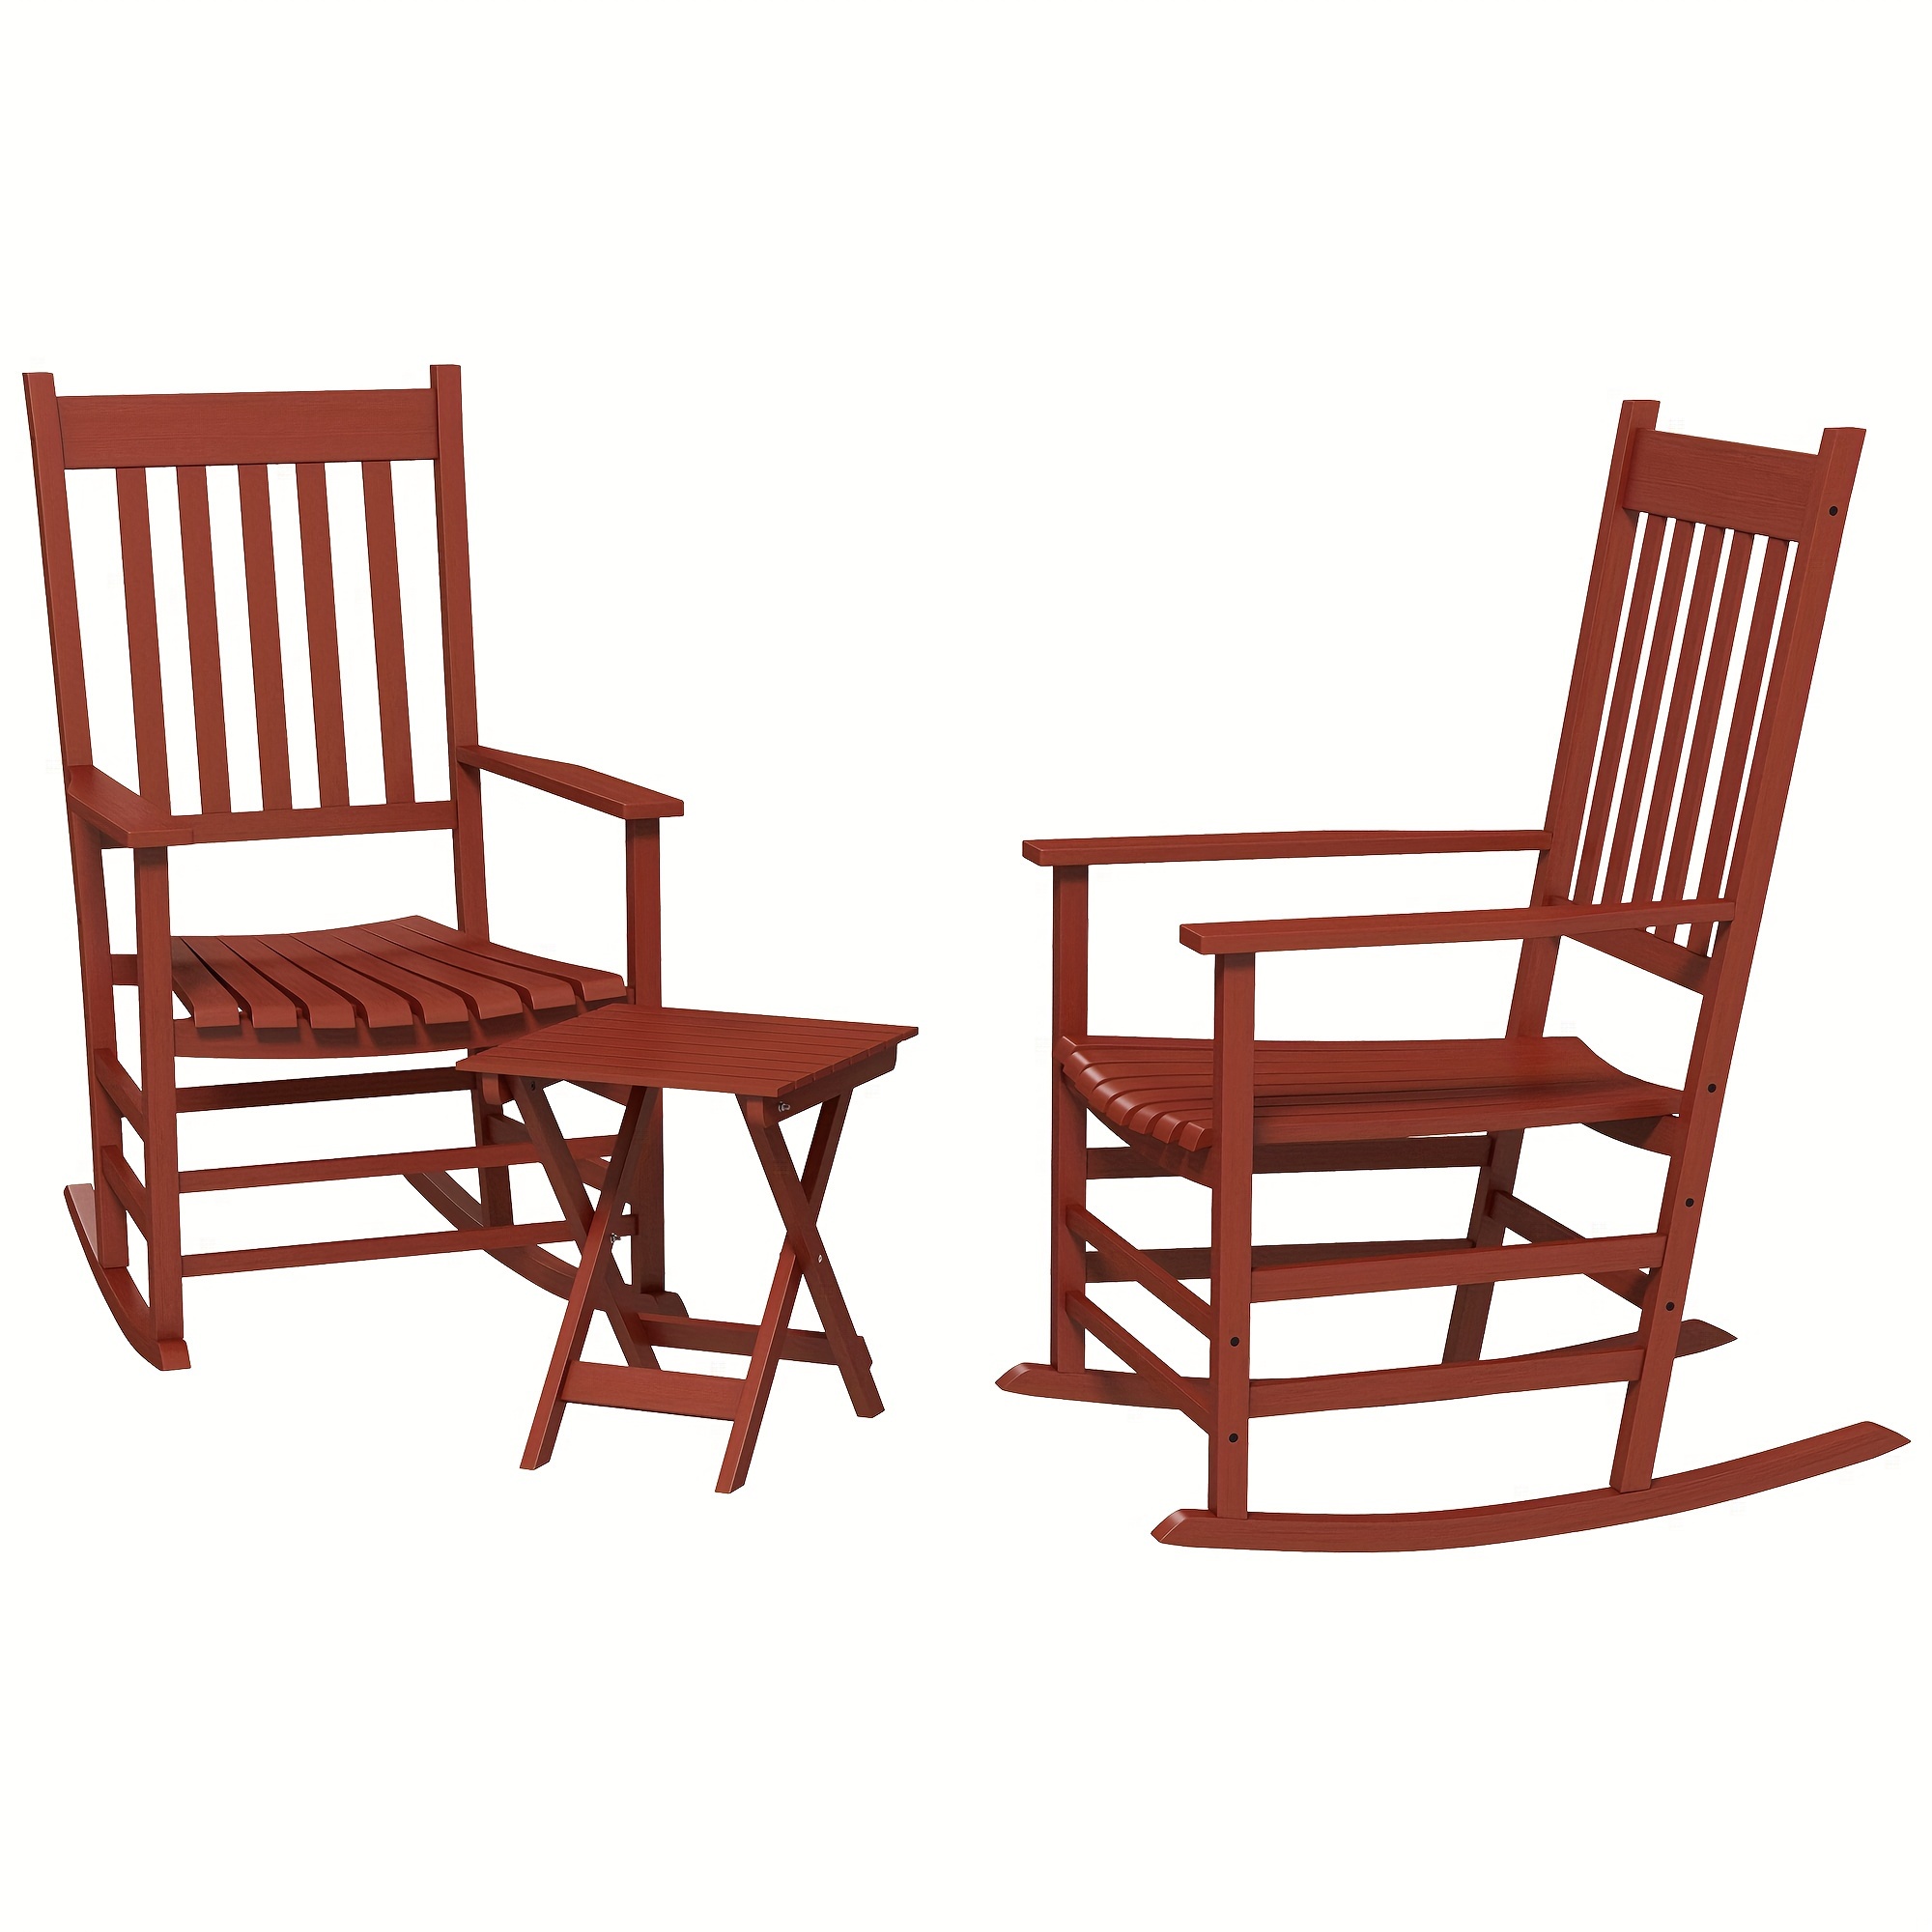 

Outsunny Outdoor Rocking Chair Set Of 2 With Side Table, Patio Wooden Rocking Chair With Smooth Armrests, High Back For Garden, Balcony, Porch, Supports Up To 352 Lbs., Red